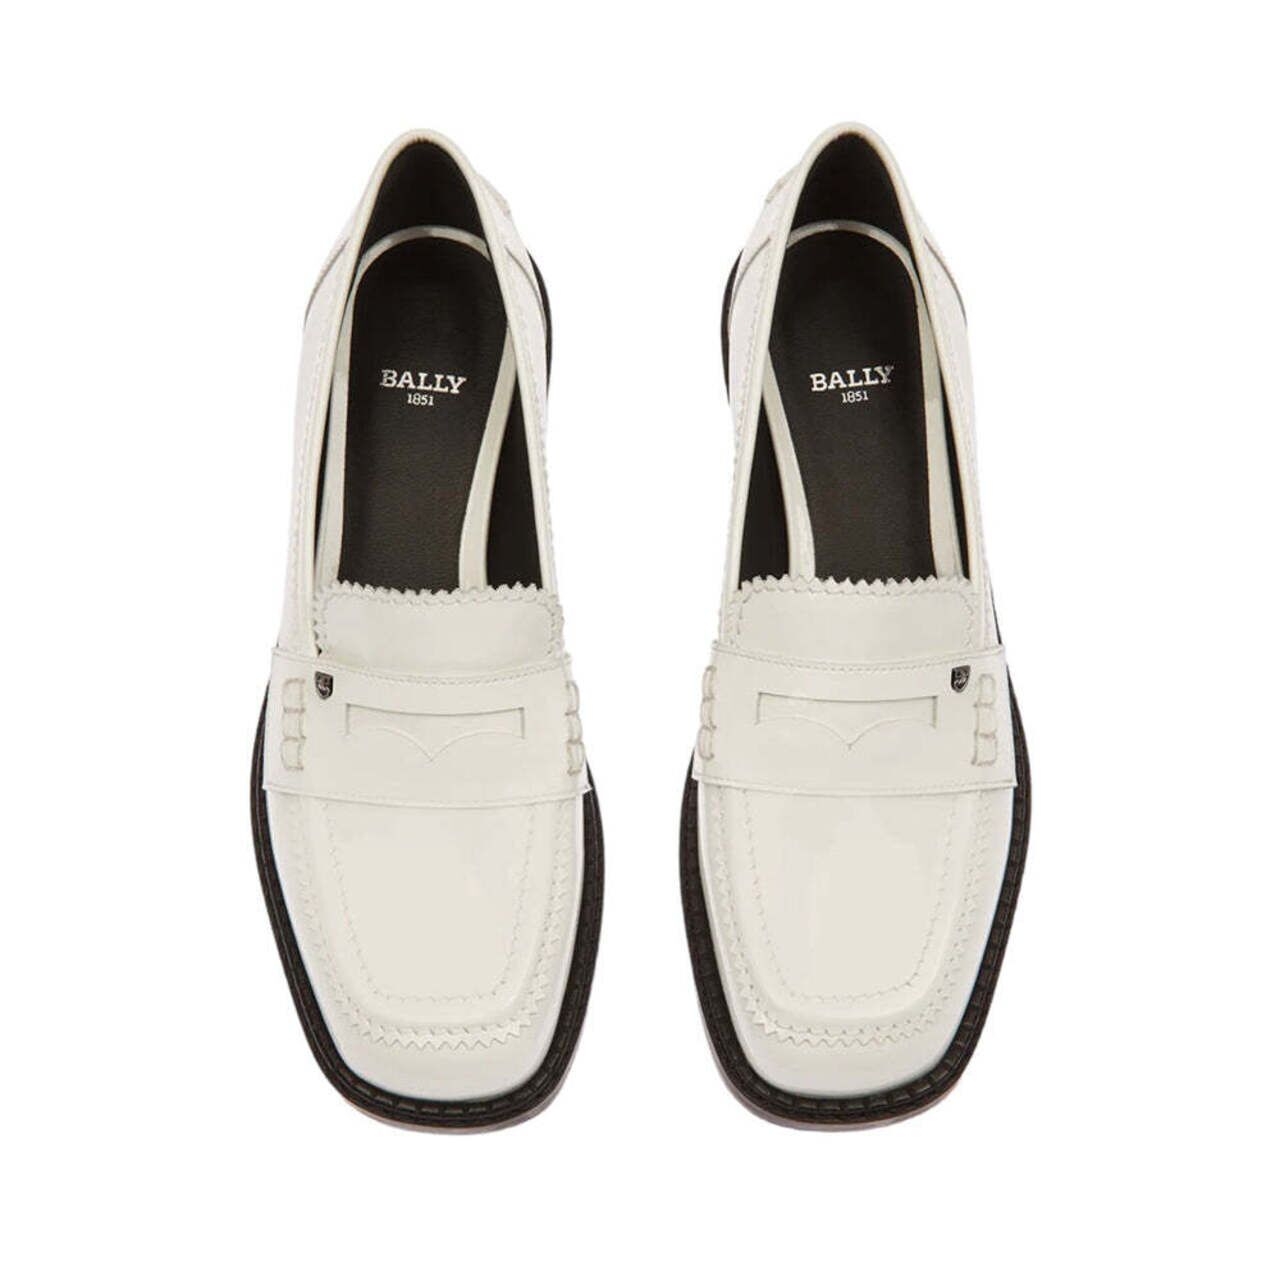 Bally Elly Moccasins Loafers Patent Leather White